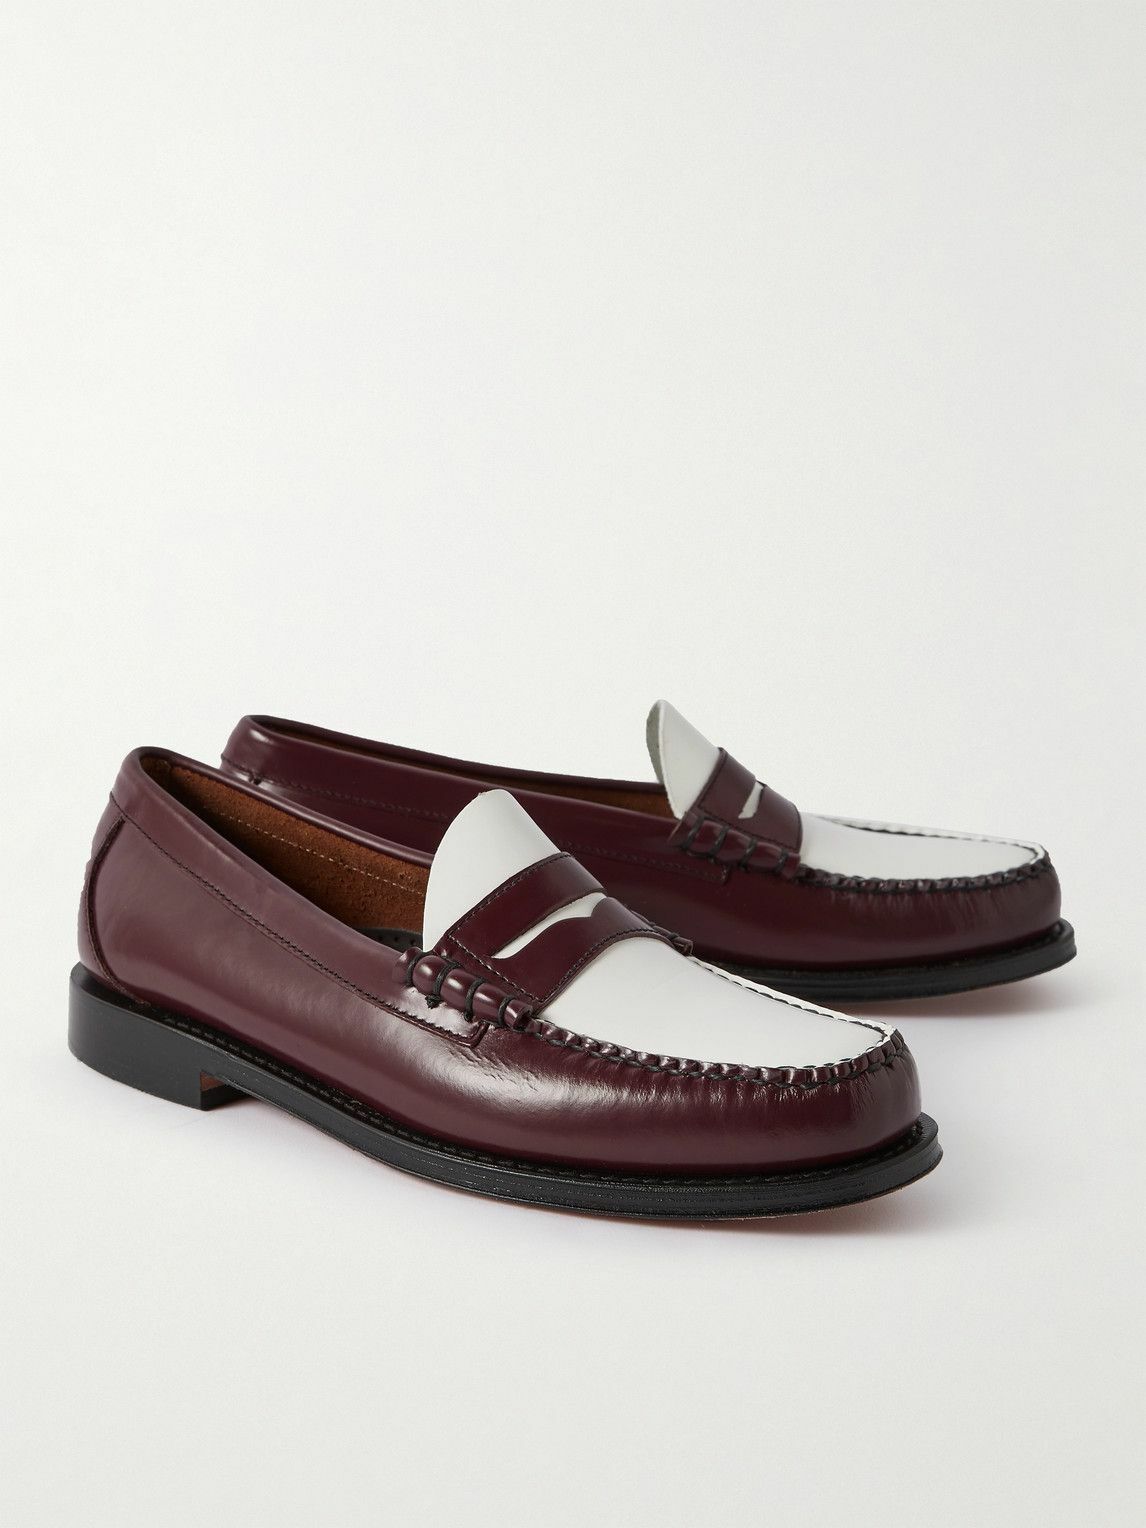 G.H. Bass & Co. - Leather Penny Loafers - Burgundy G.H. Bass & Co.